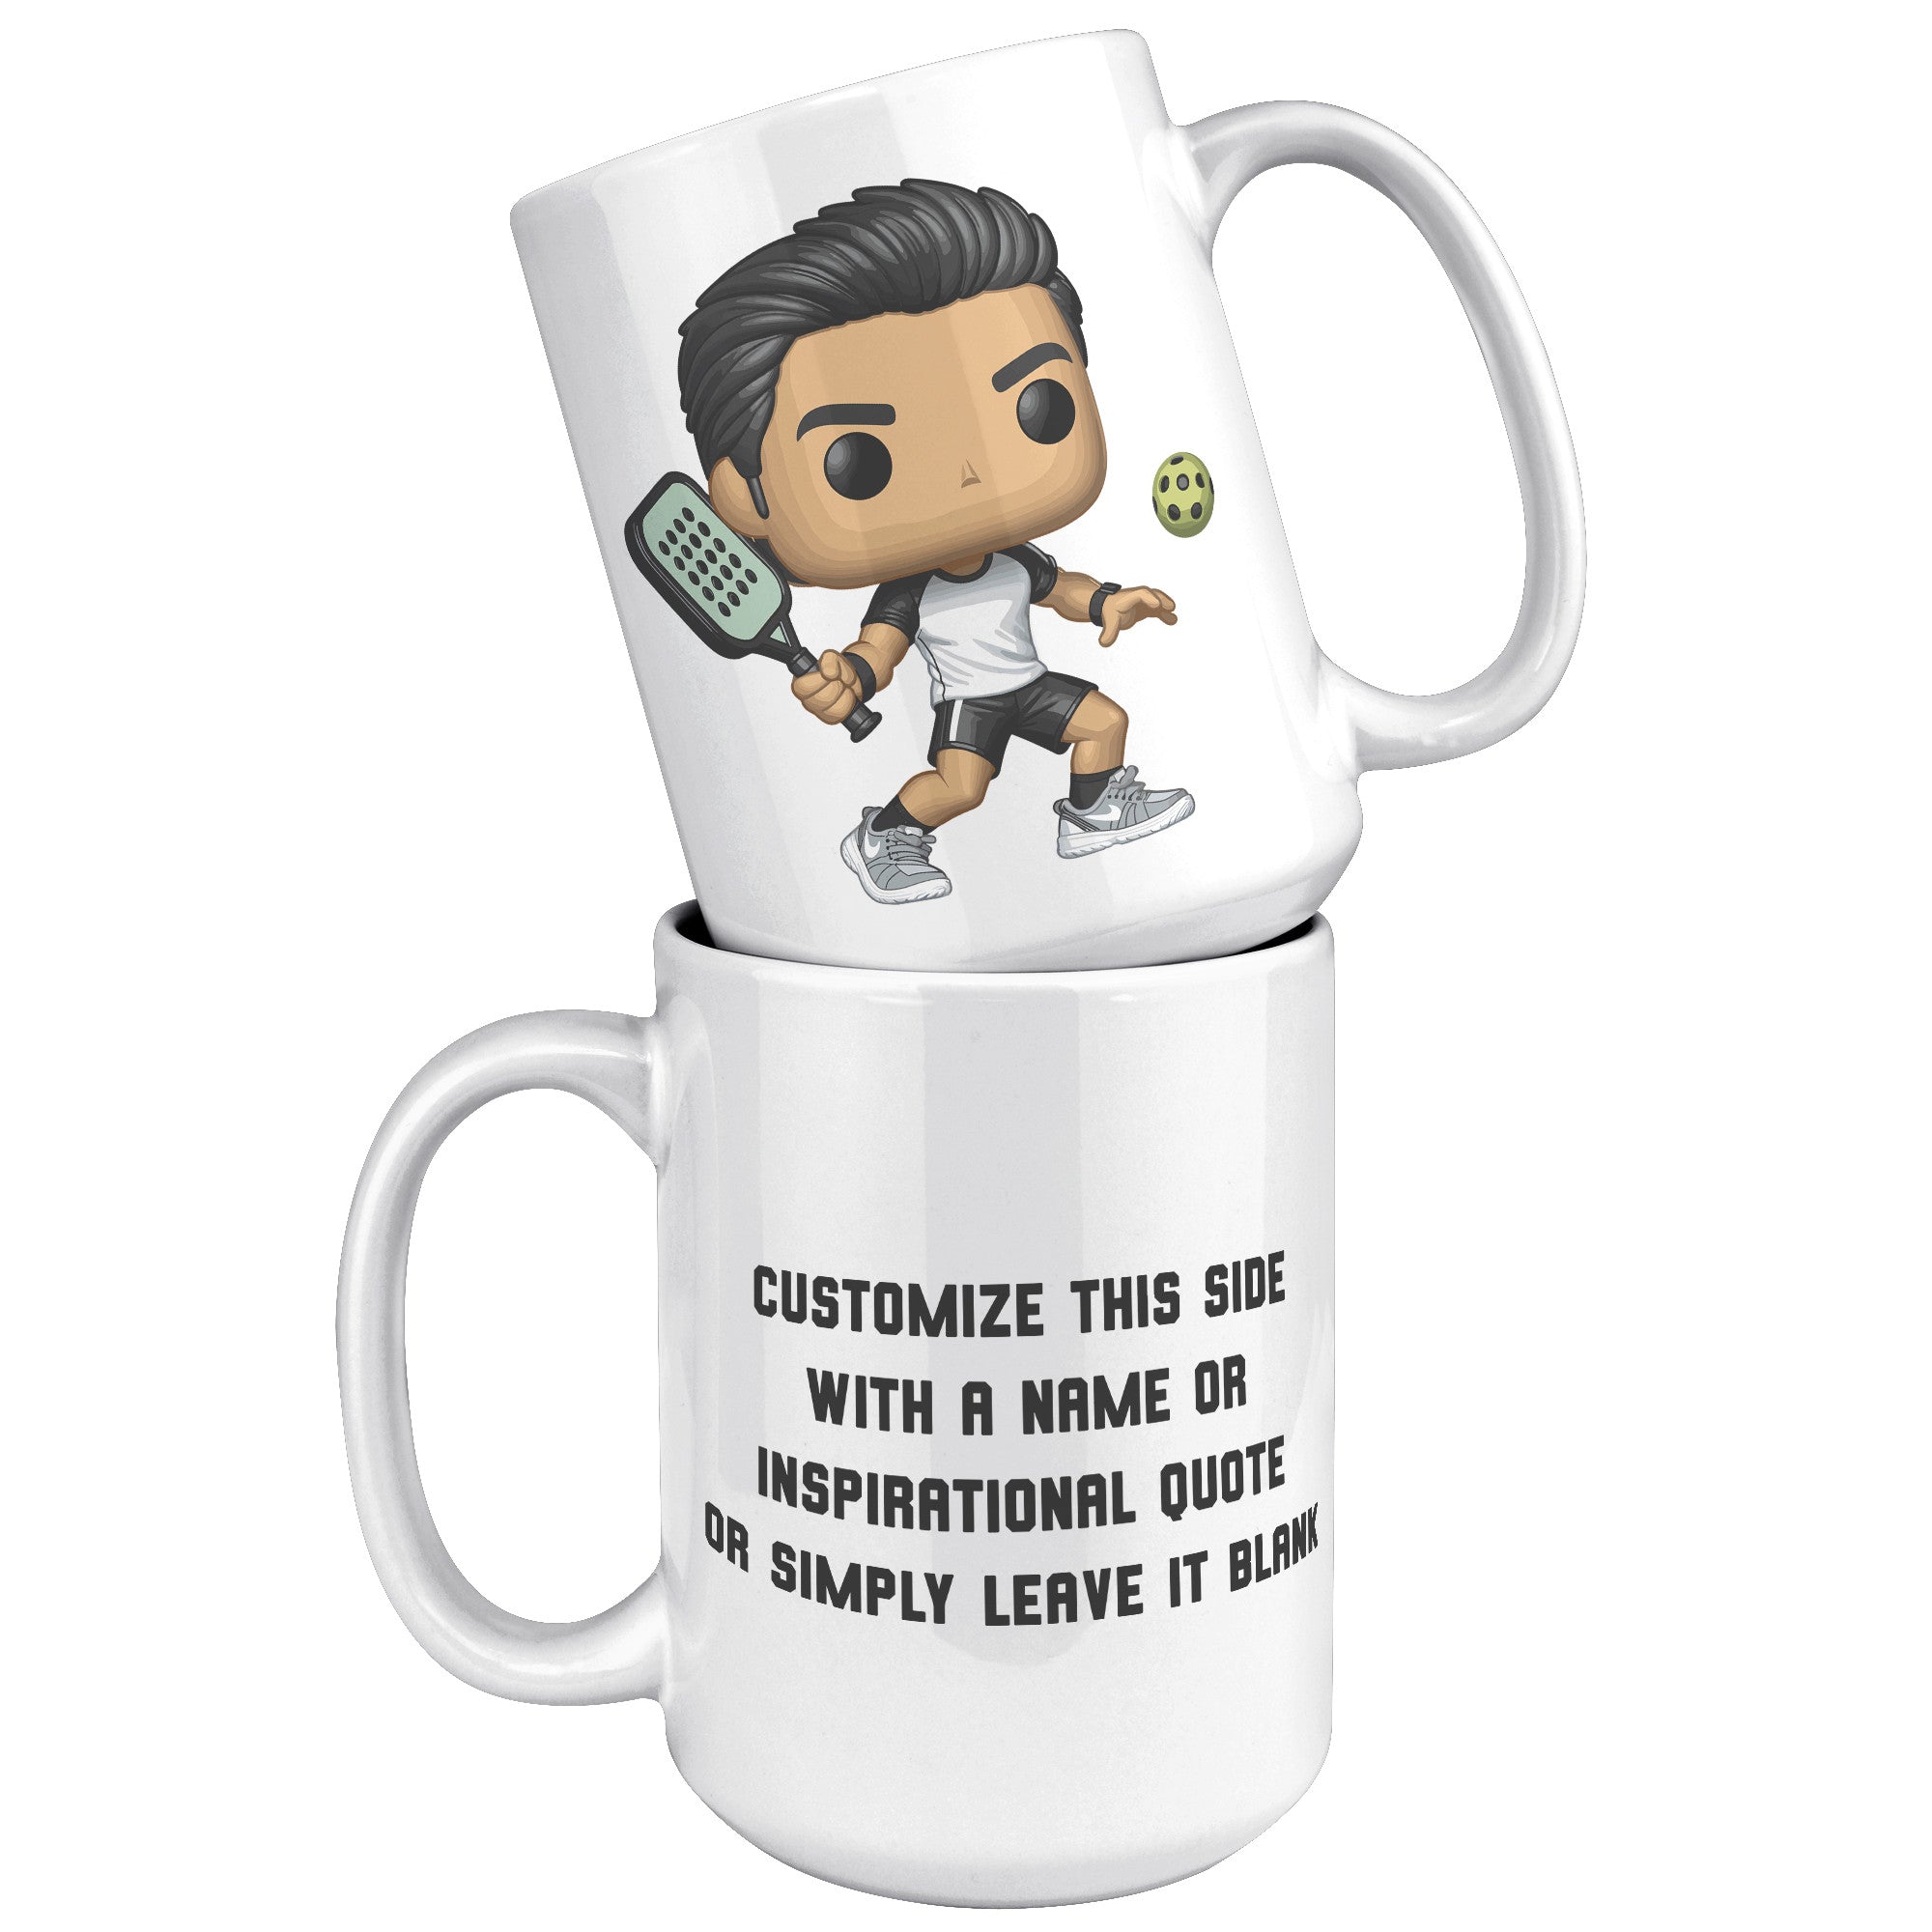 "Funko Pop Style Pickle Ball Player Boy Coffee Mug - Cute Athletic Cup - Perfect Gift for Pickle Ball Enthusiasts - Sporty Boy Apparel" - H1